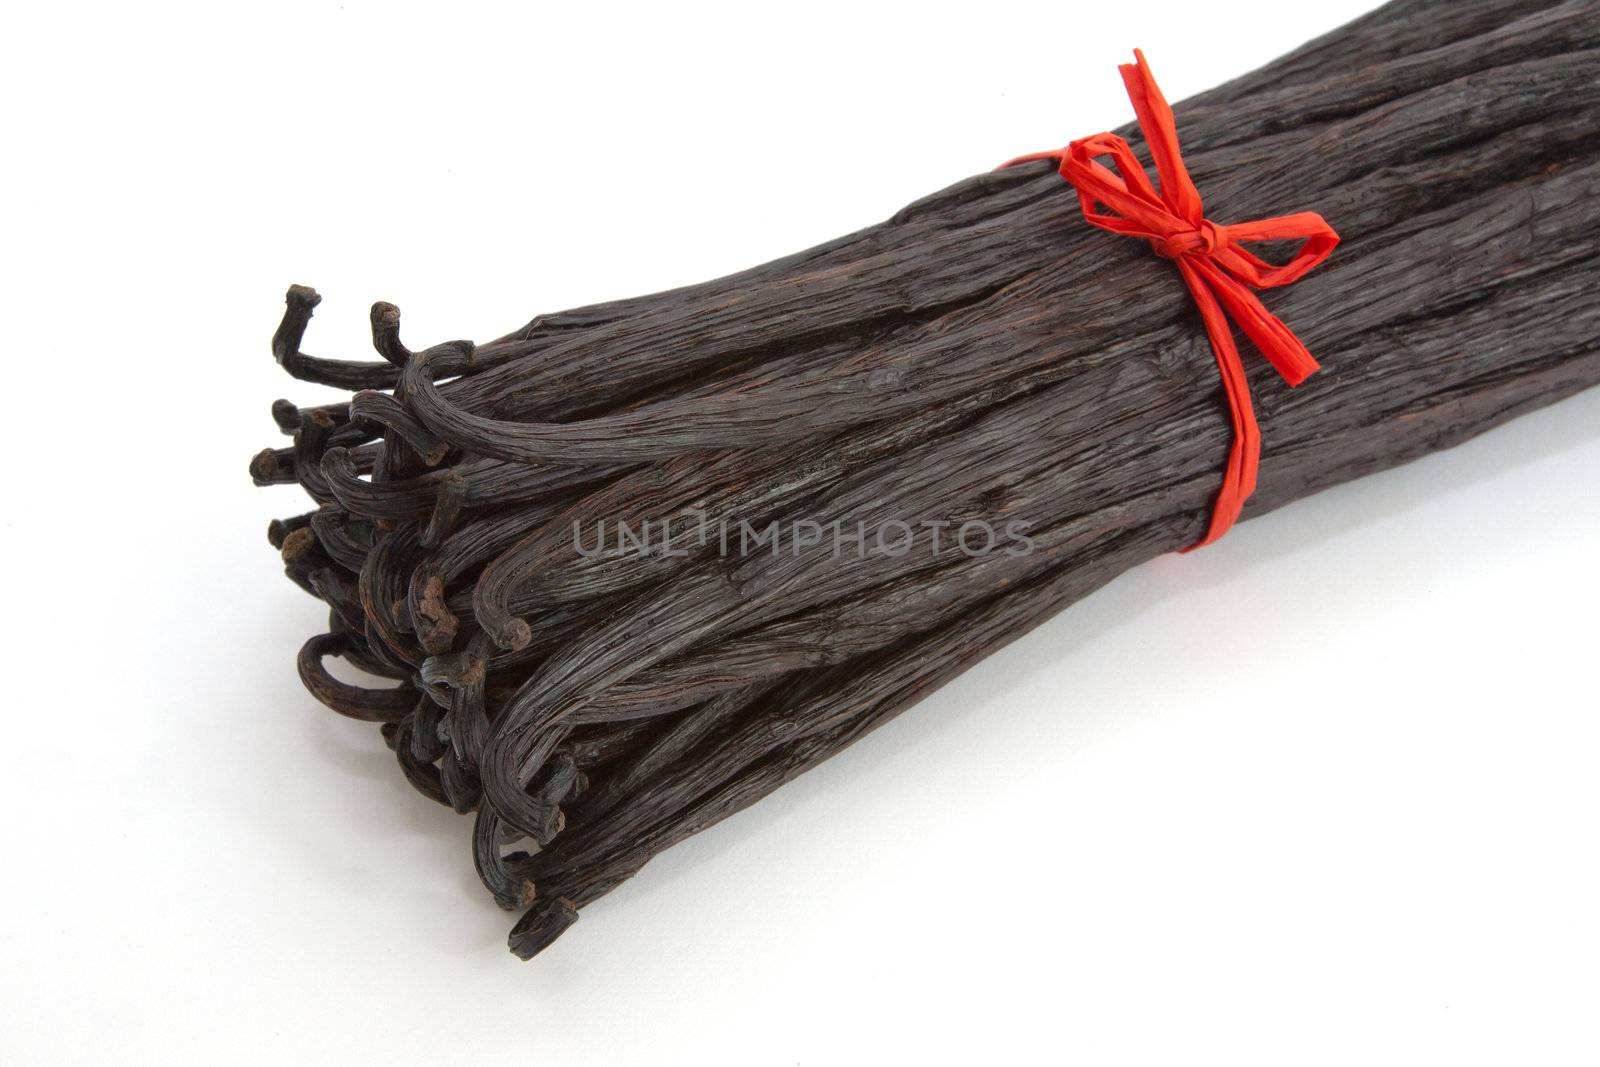 Boot of Bourbon vanilla beans isolated on white background